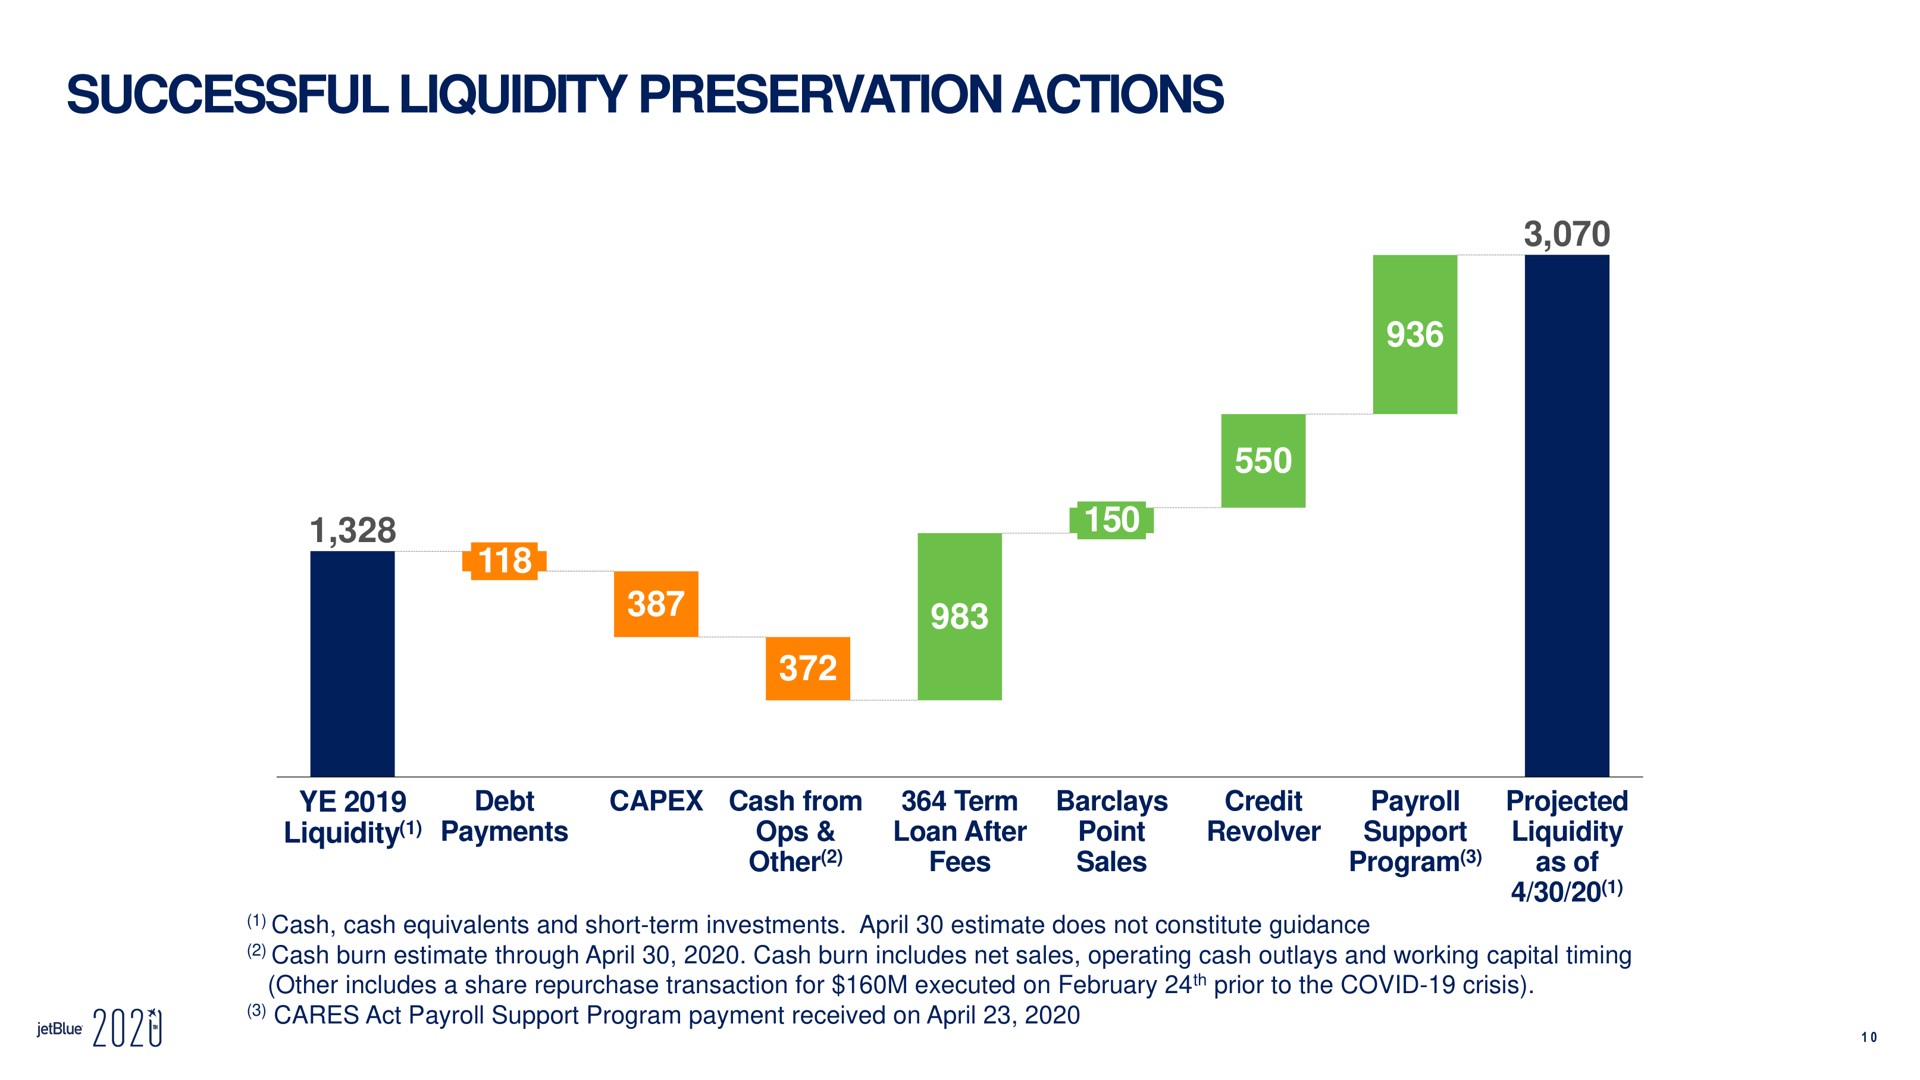 successful liquidity preservation actions liquidity debt payments cash from other term loan after fees point sales credit revolver payroll support program projected liquidity as of term cares act payment received on | jetBlue